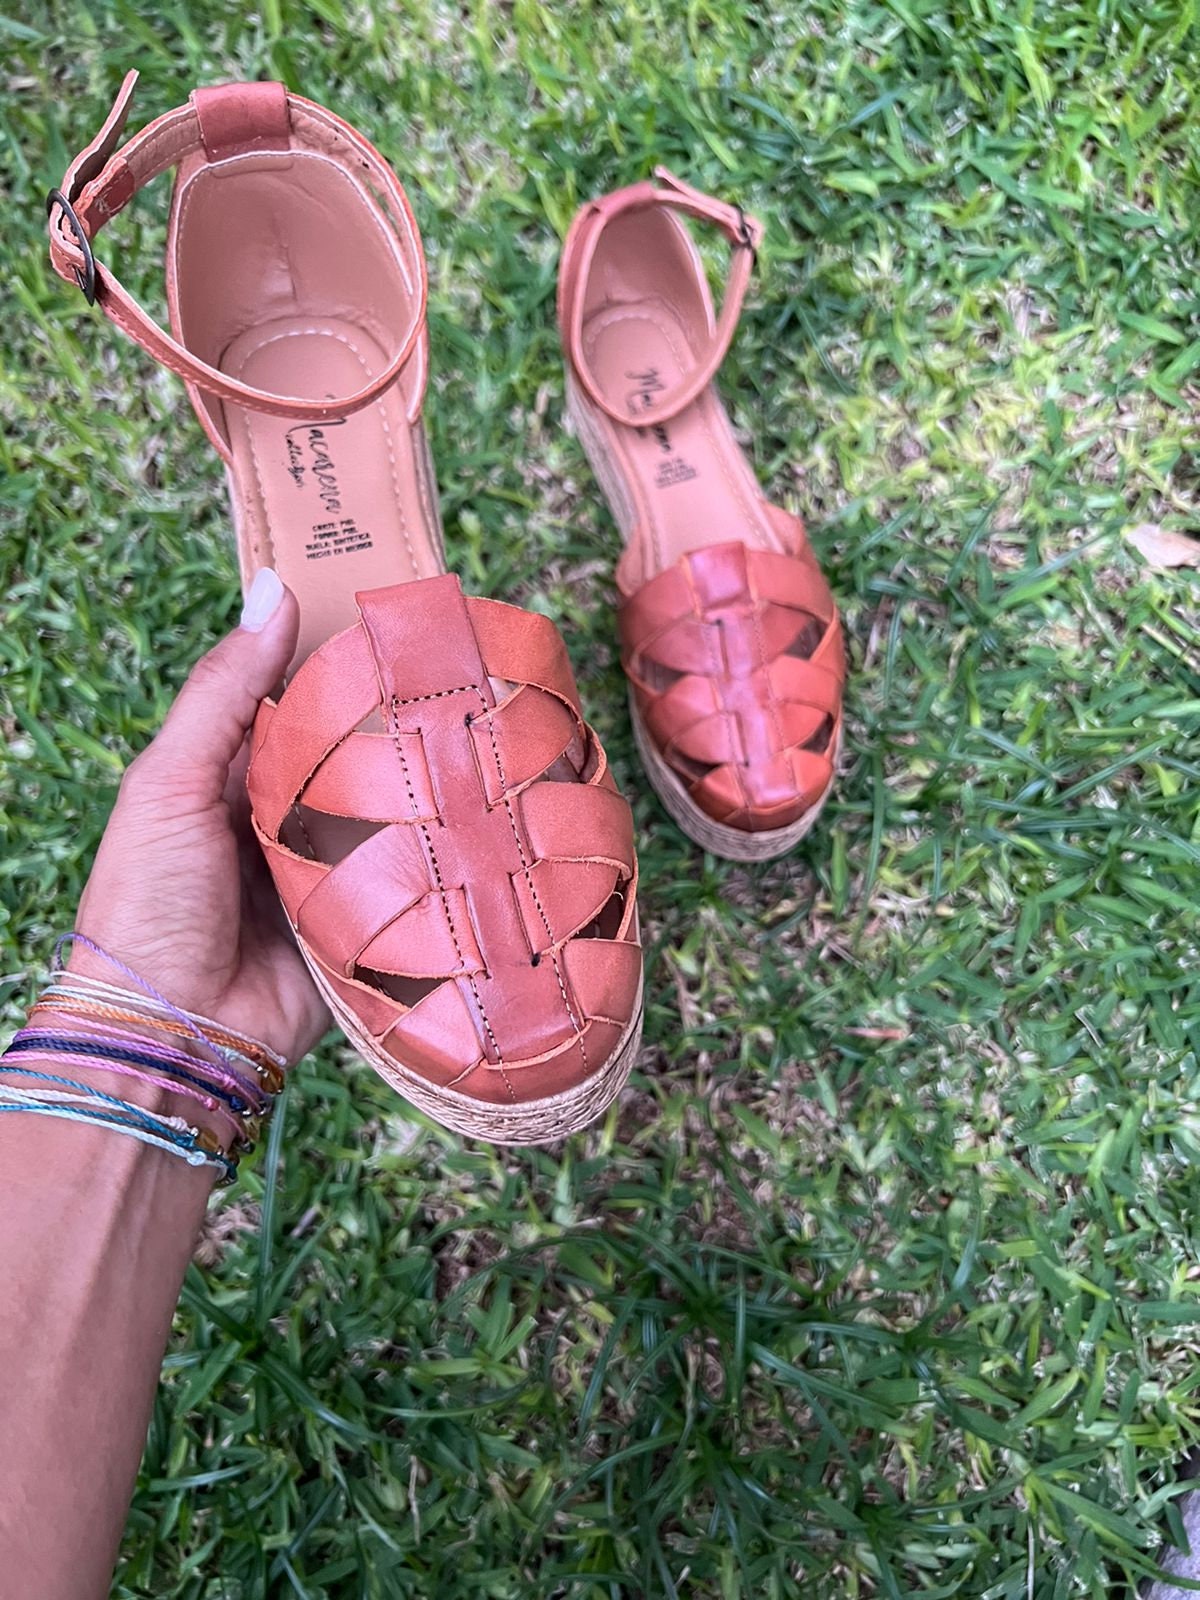 Habaana Platform Sandal ~ Hippie Vintage ~ Mexican Style ~ Colorful Leather ~ Mexican Huaraches